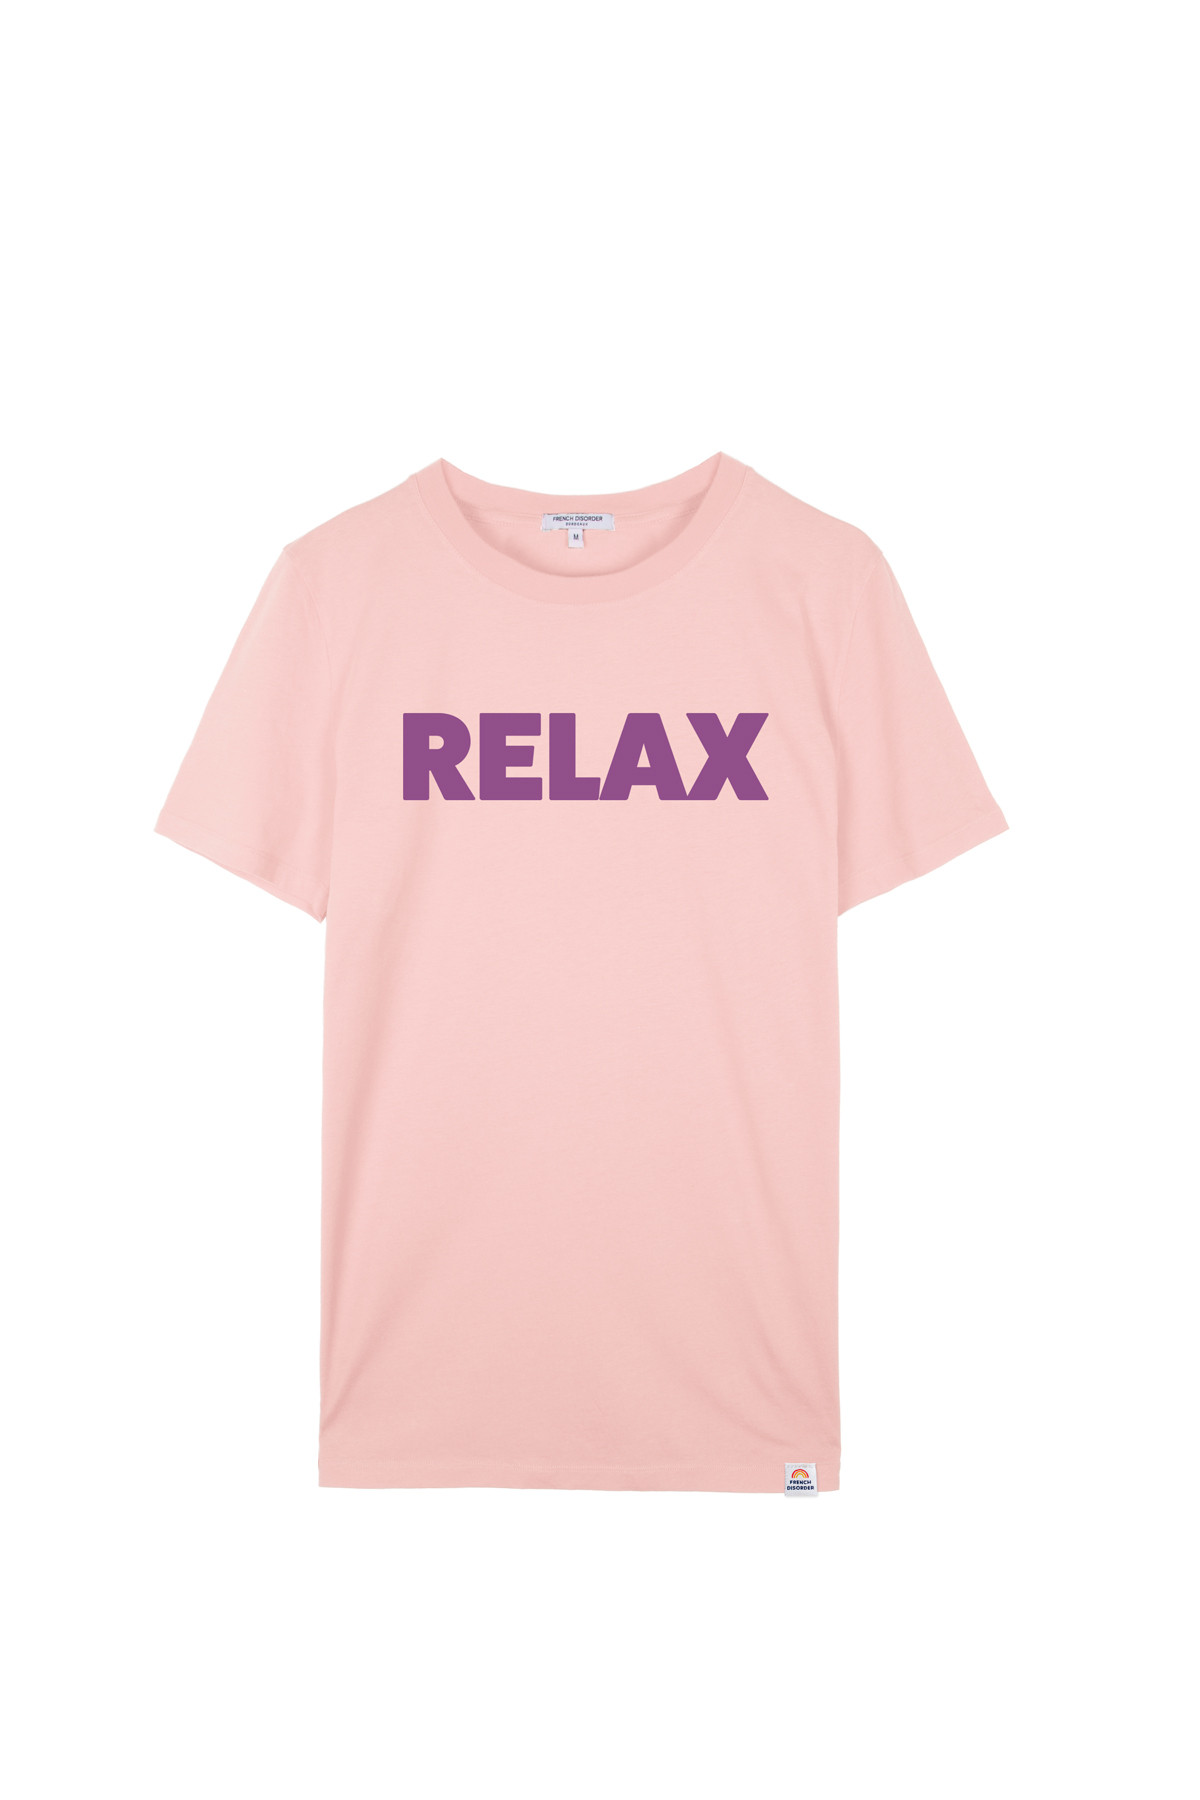 Photo de T-SHIRTS COL ROND Tshirt RELAX chez French Disorder